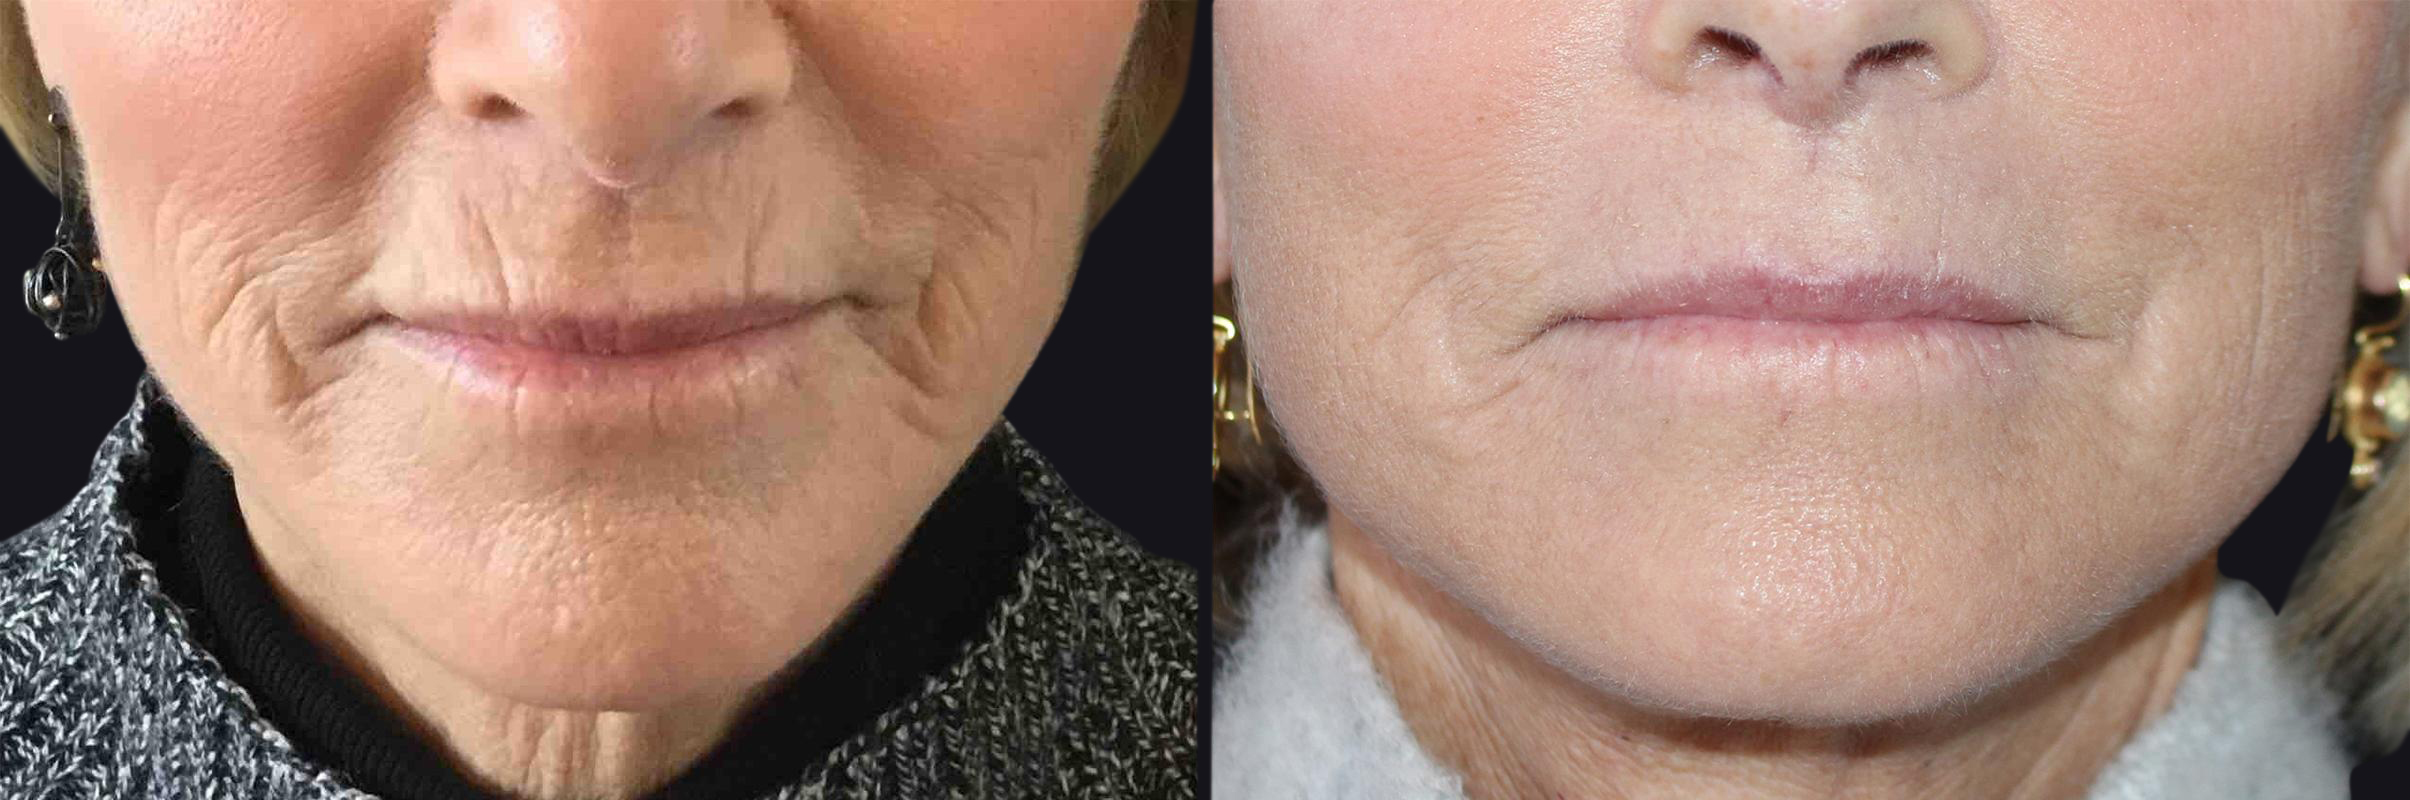 Before and after image of Microneedling